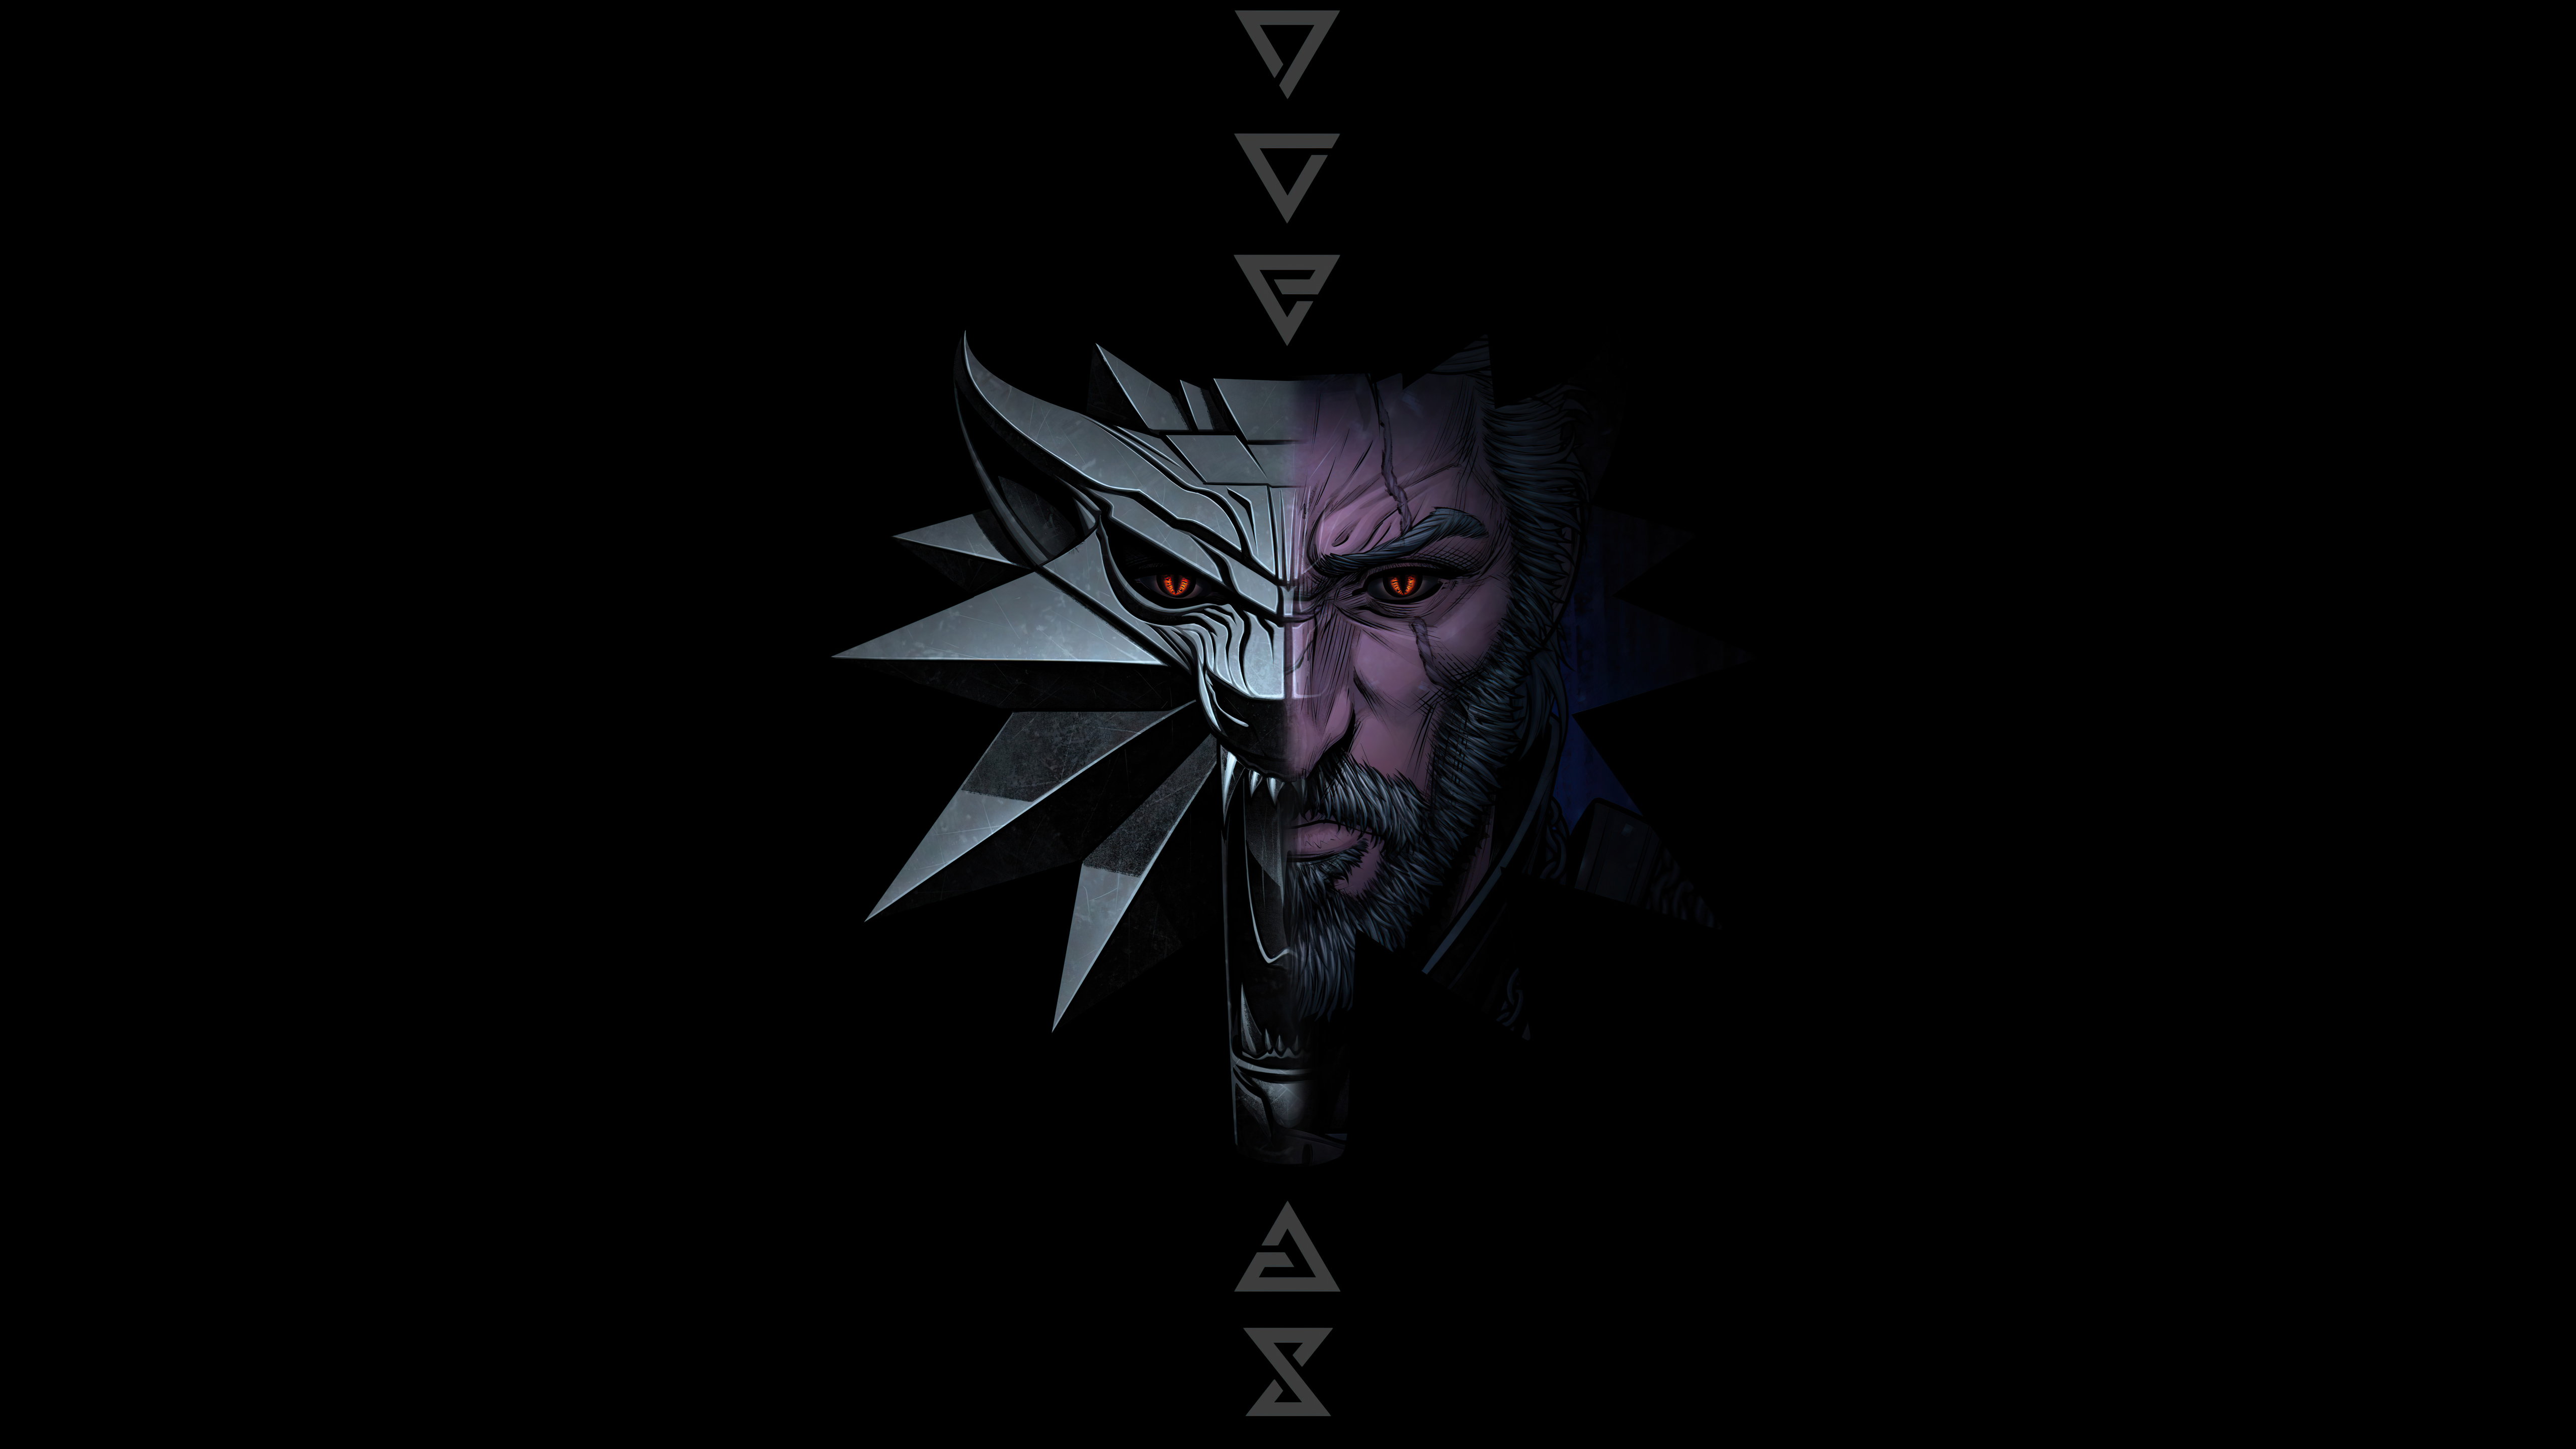 General 5120x2880 video games The Witcher 3: Wild Hunt simple background minimalism black background CD Projekt RED Geralt of Rivia video game characters book characters